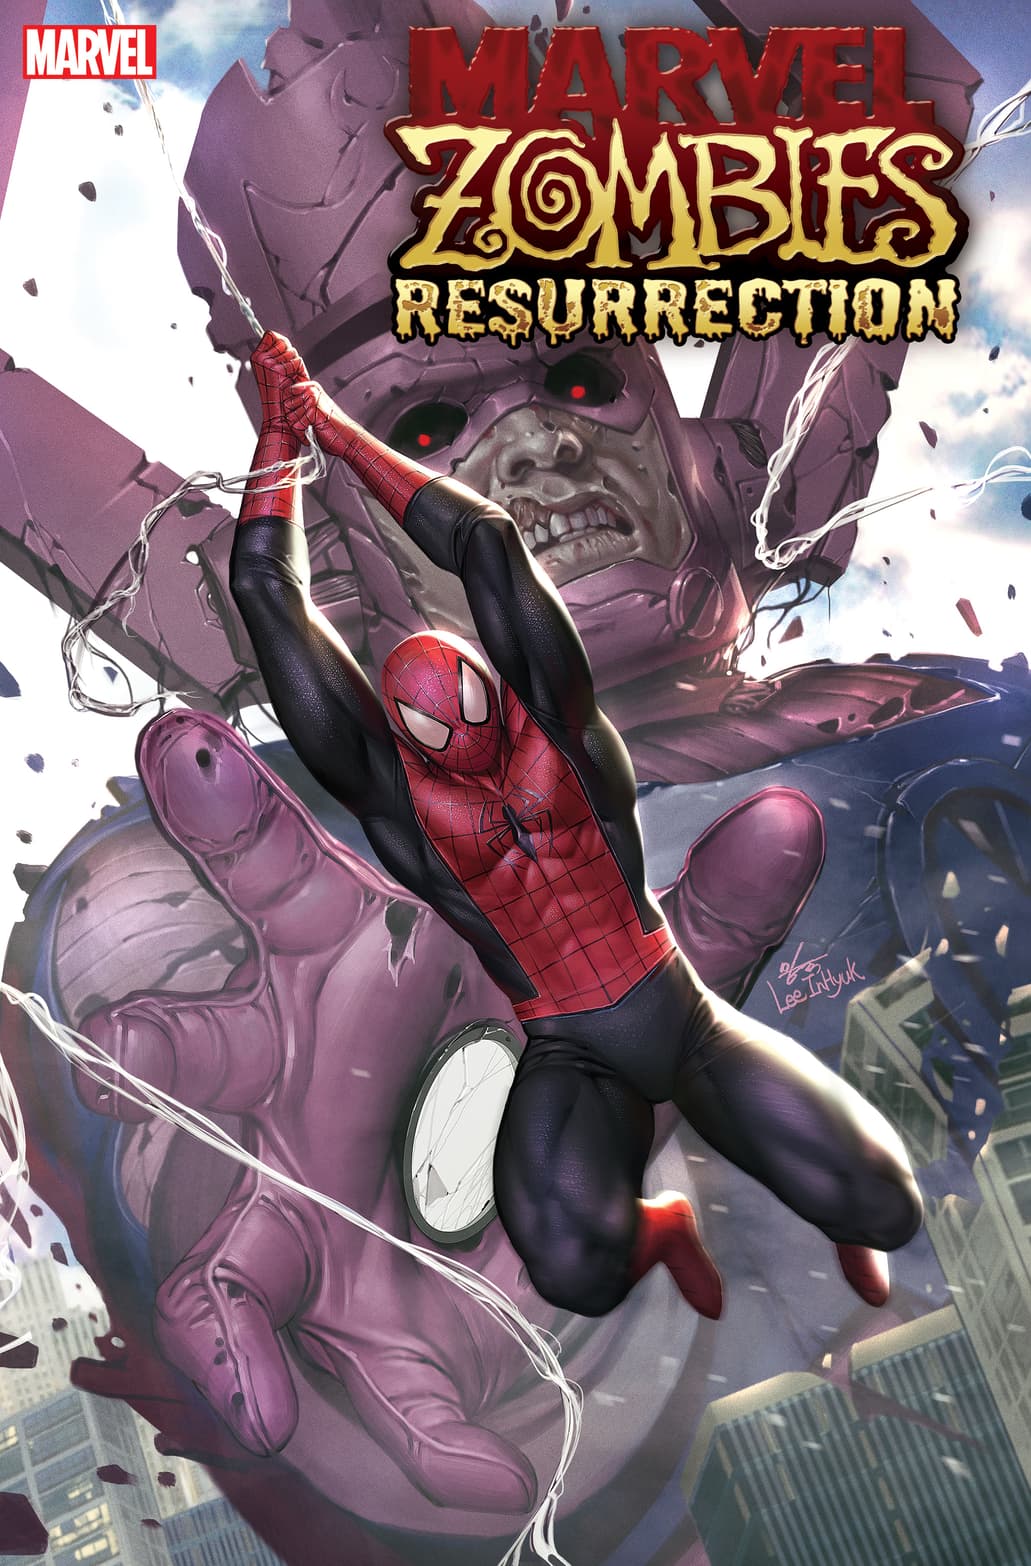 MARVEL ZOMBIES: RESURRECTION #1 cover by In-Hyuk Lee